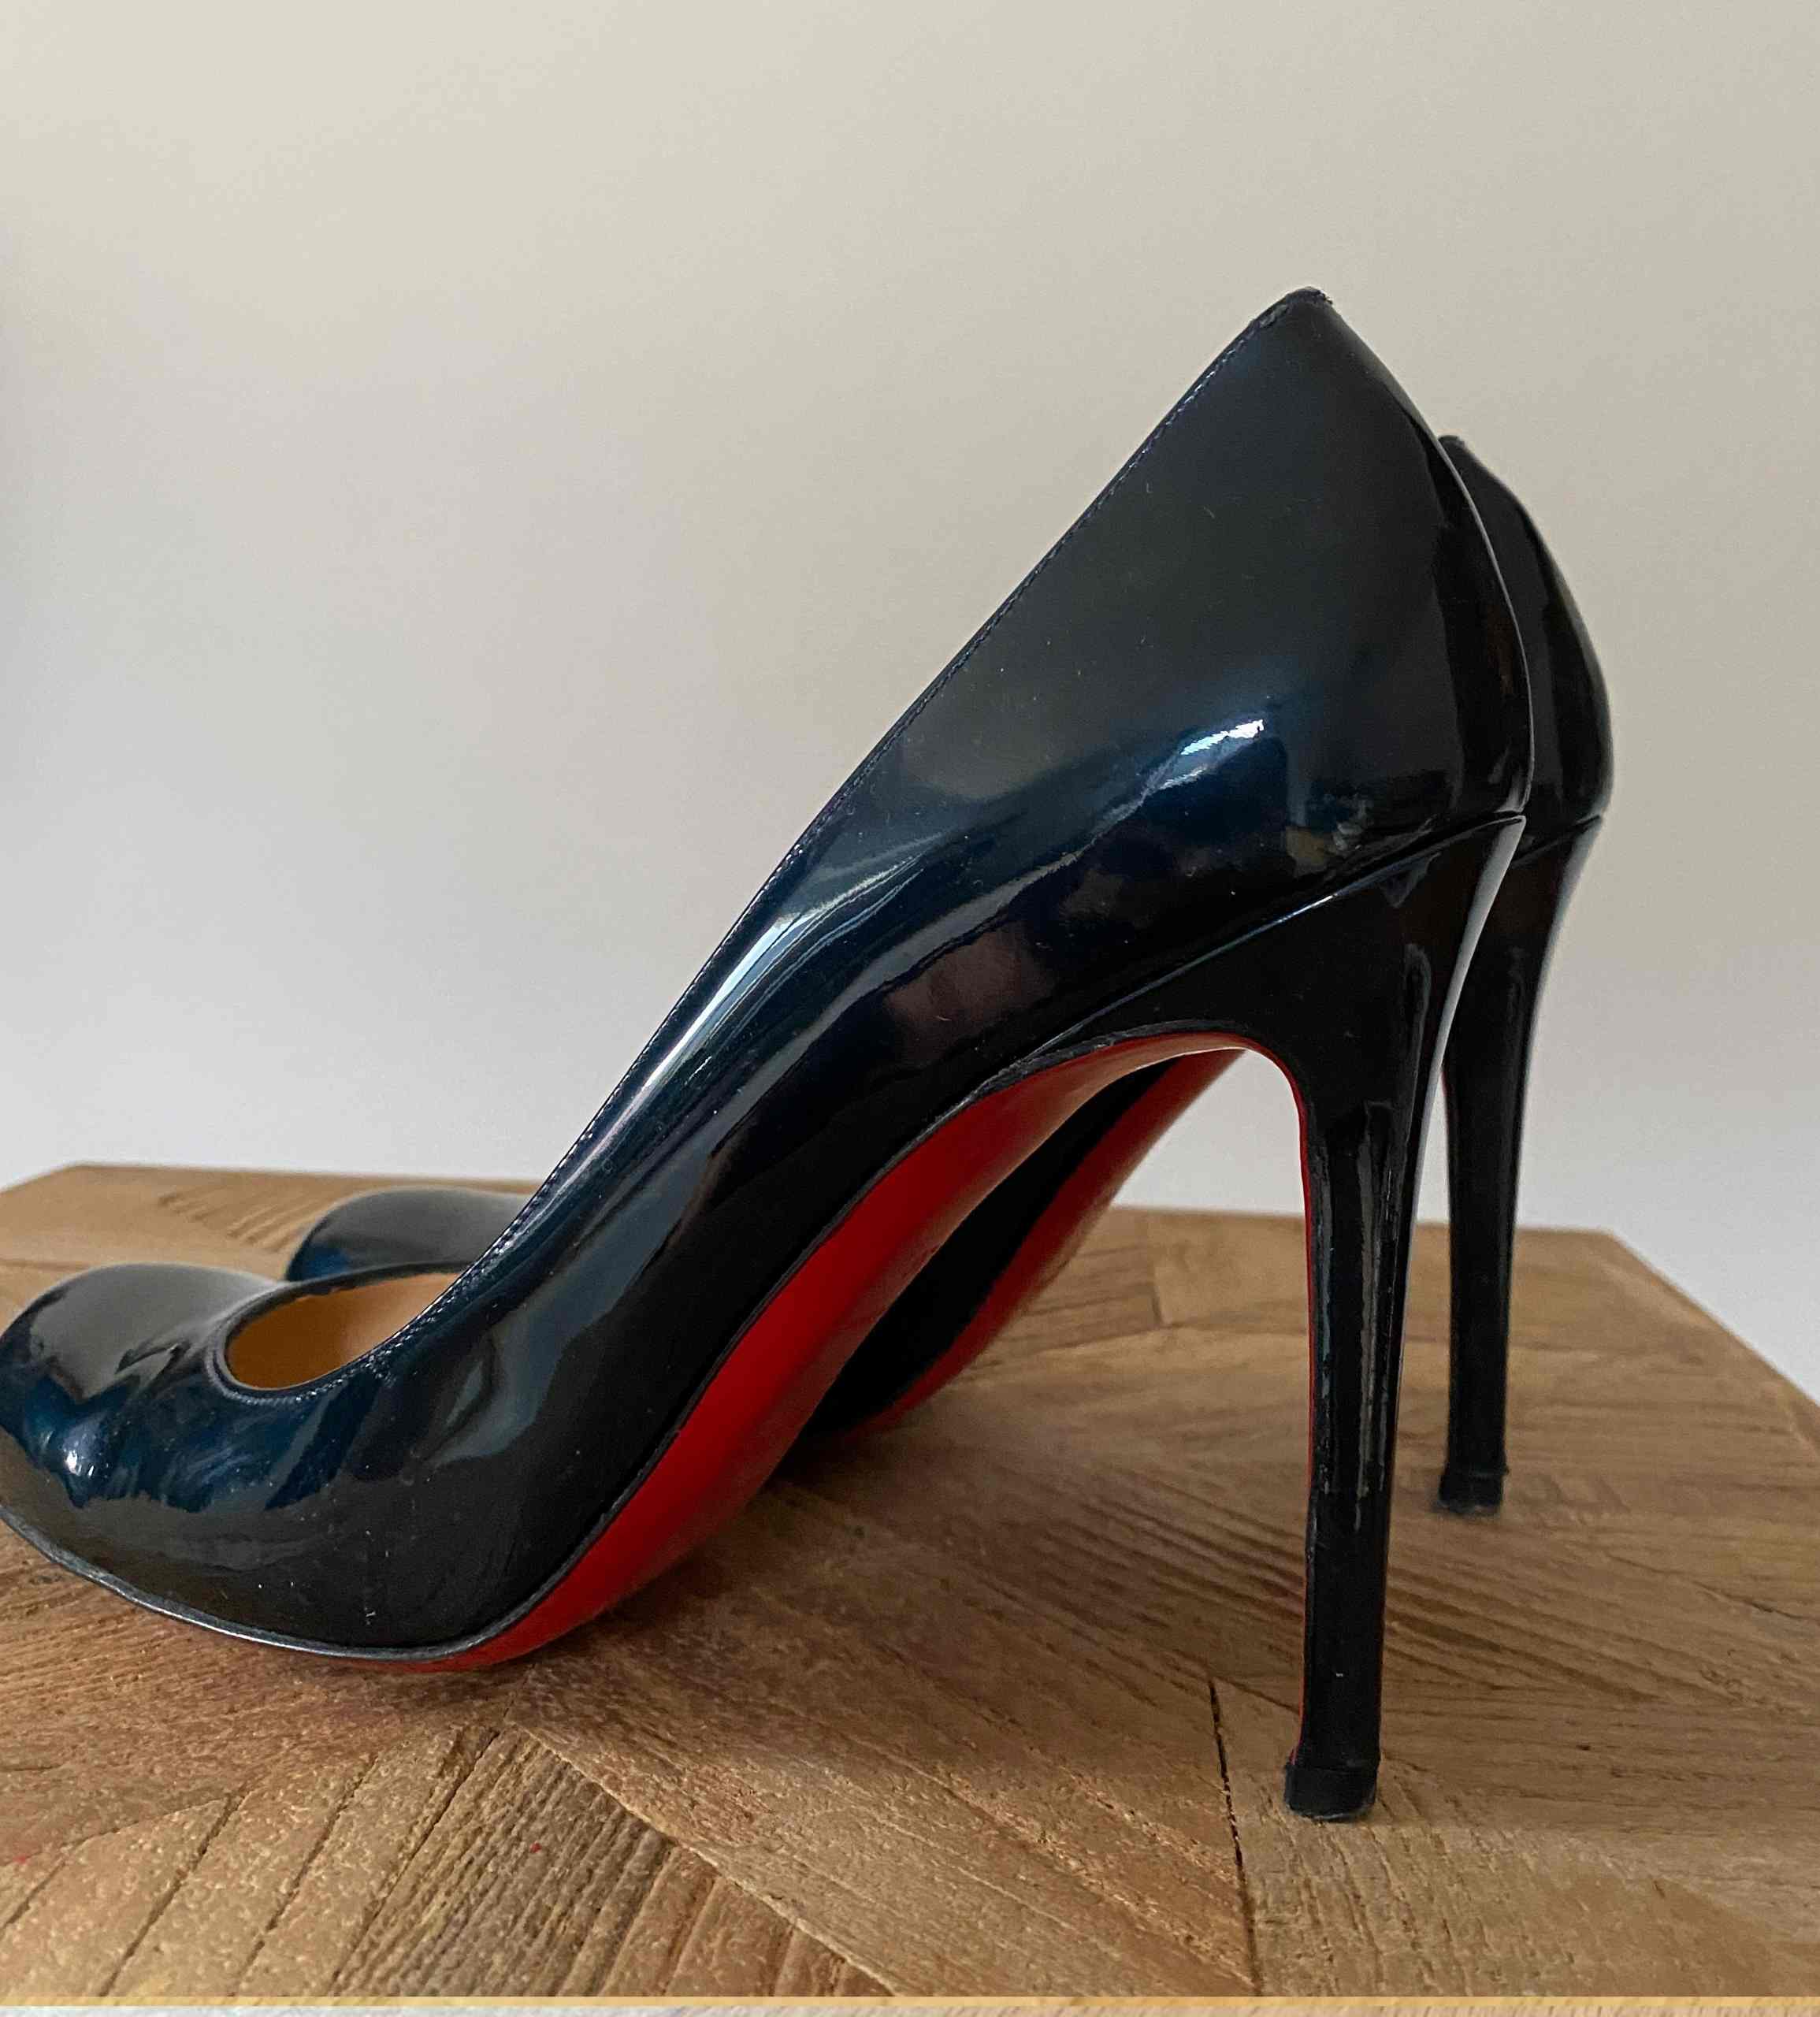 Christian Louboutin Pre-owned Women's Leather Boots